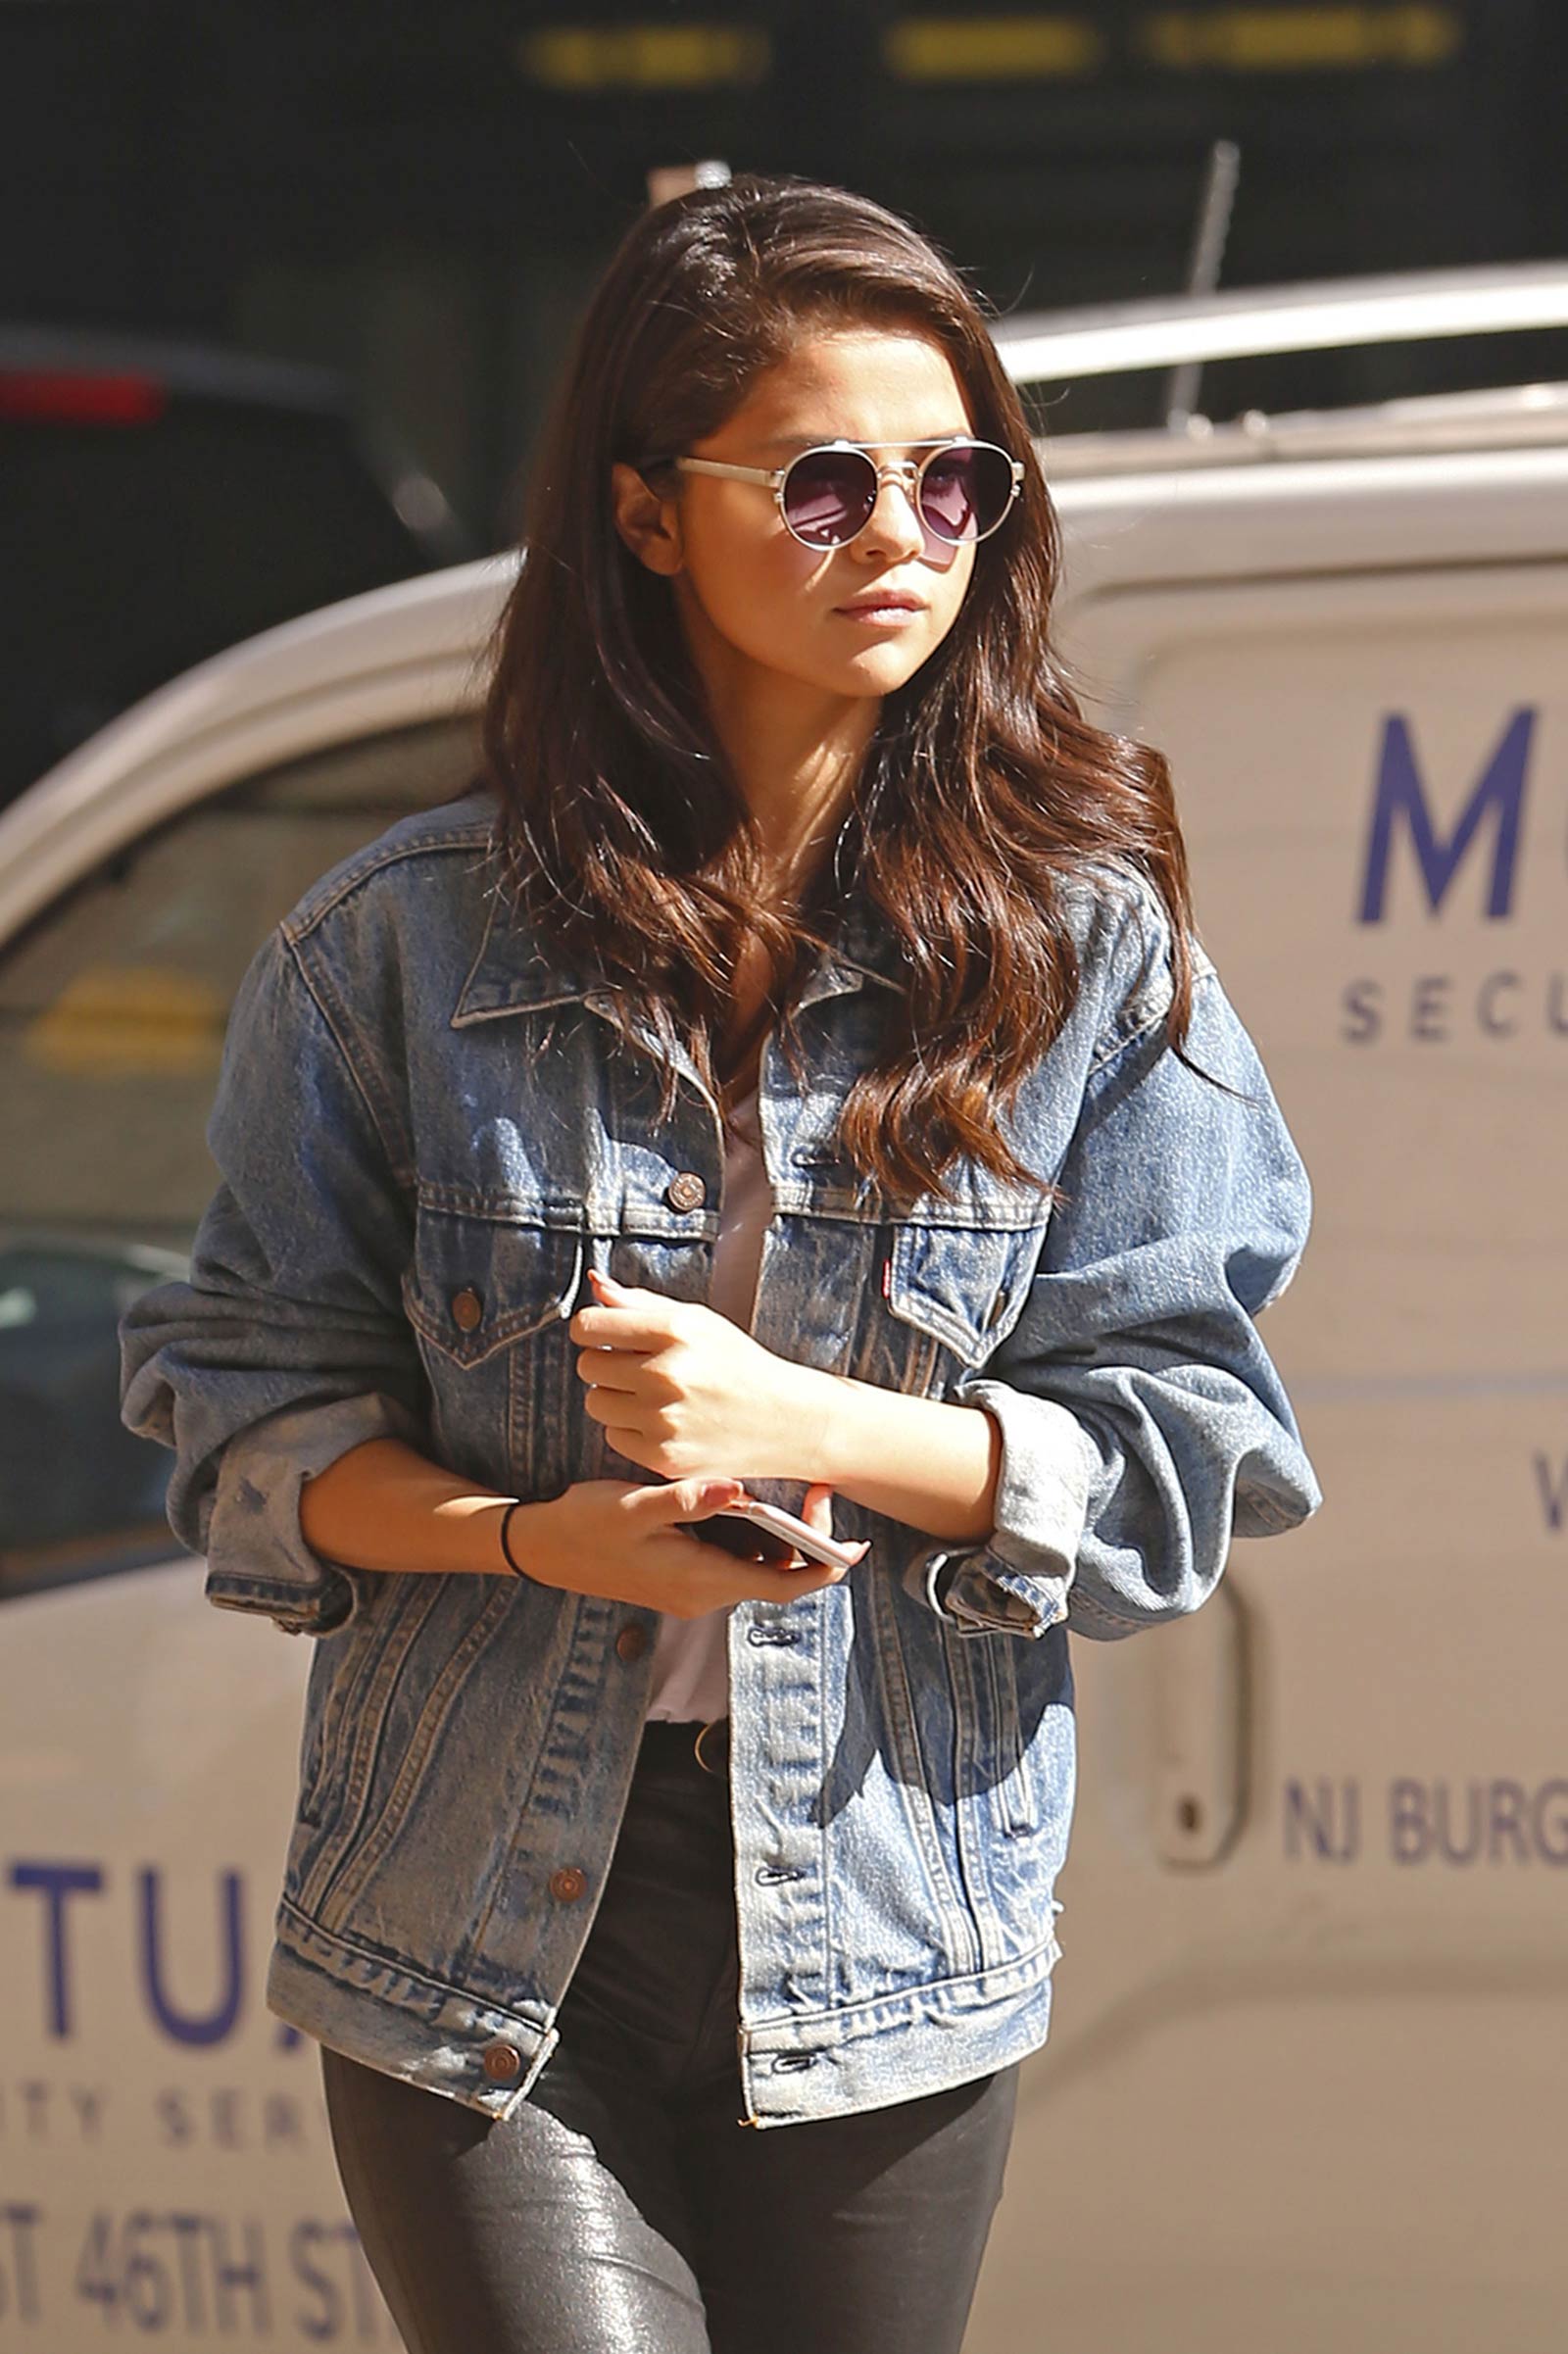 Selena Gomez out and about in New York City